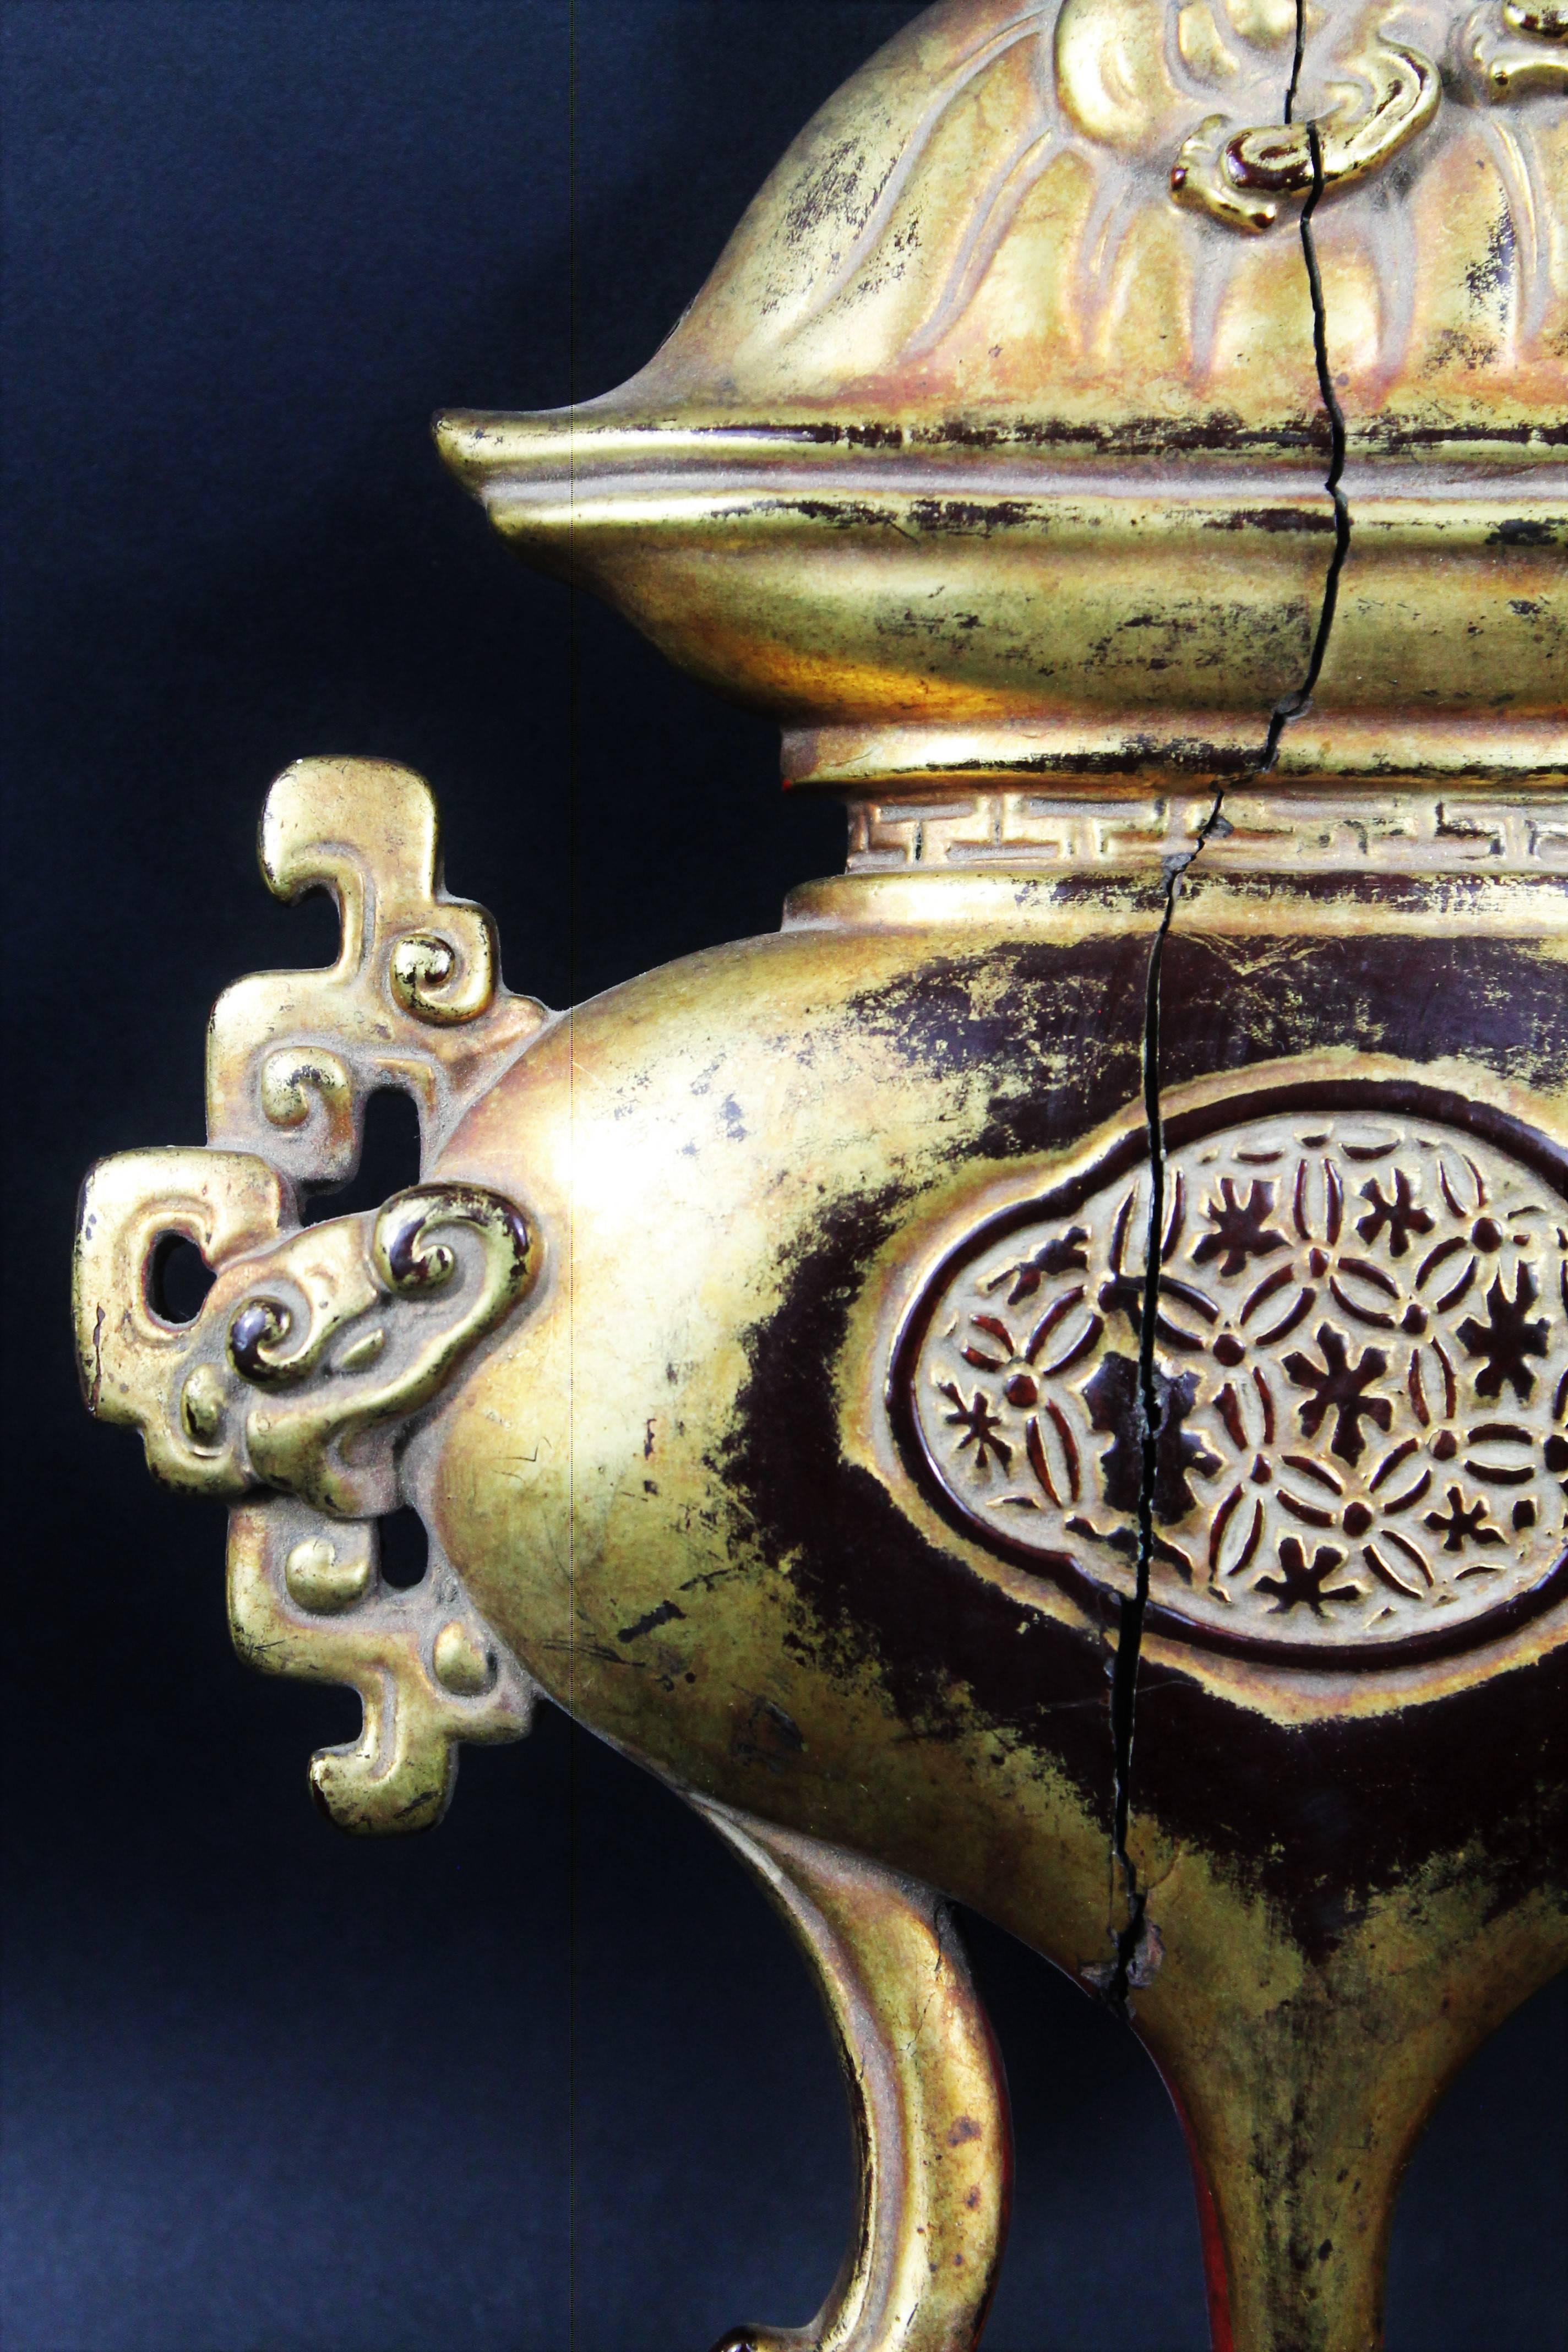 Interesting element probably coming from a lacquered and gilded wood furniture or panel representing a tripod - shaped vase with curved legs with two archaic style side handles and a shisi as a handle for the lid.
Very nice work of lacquering and